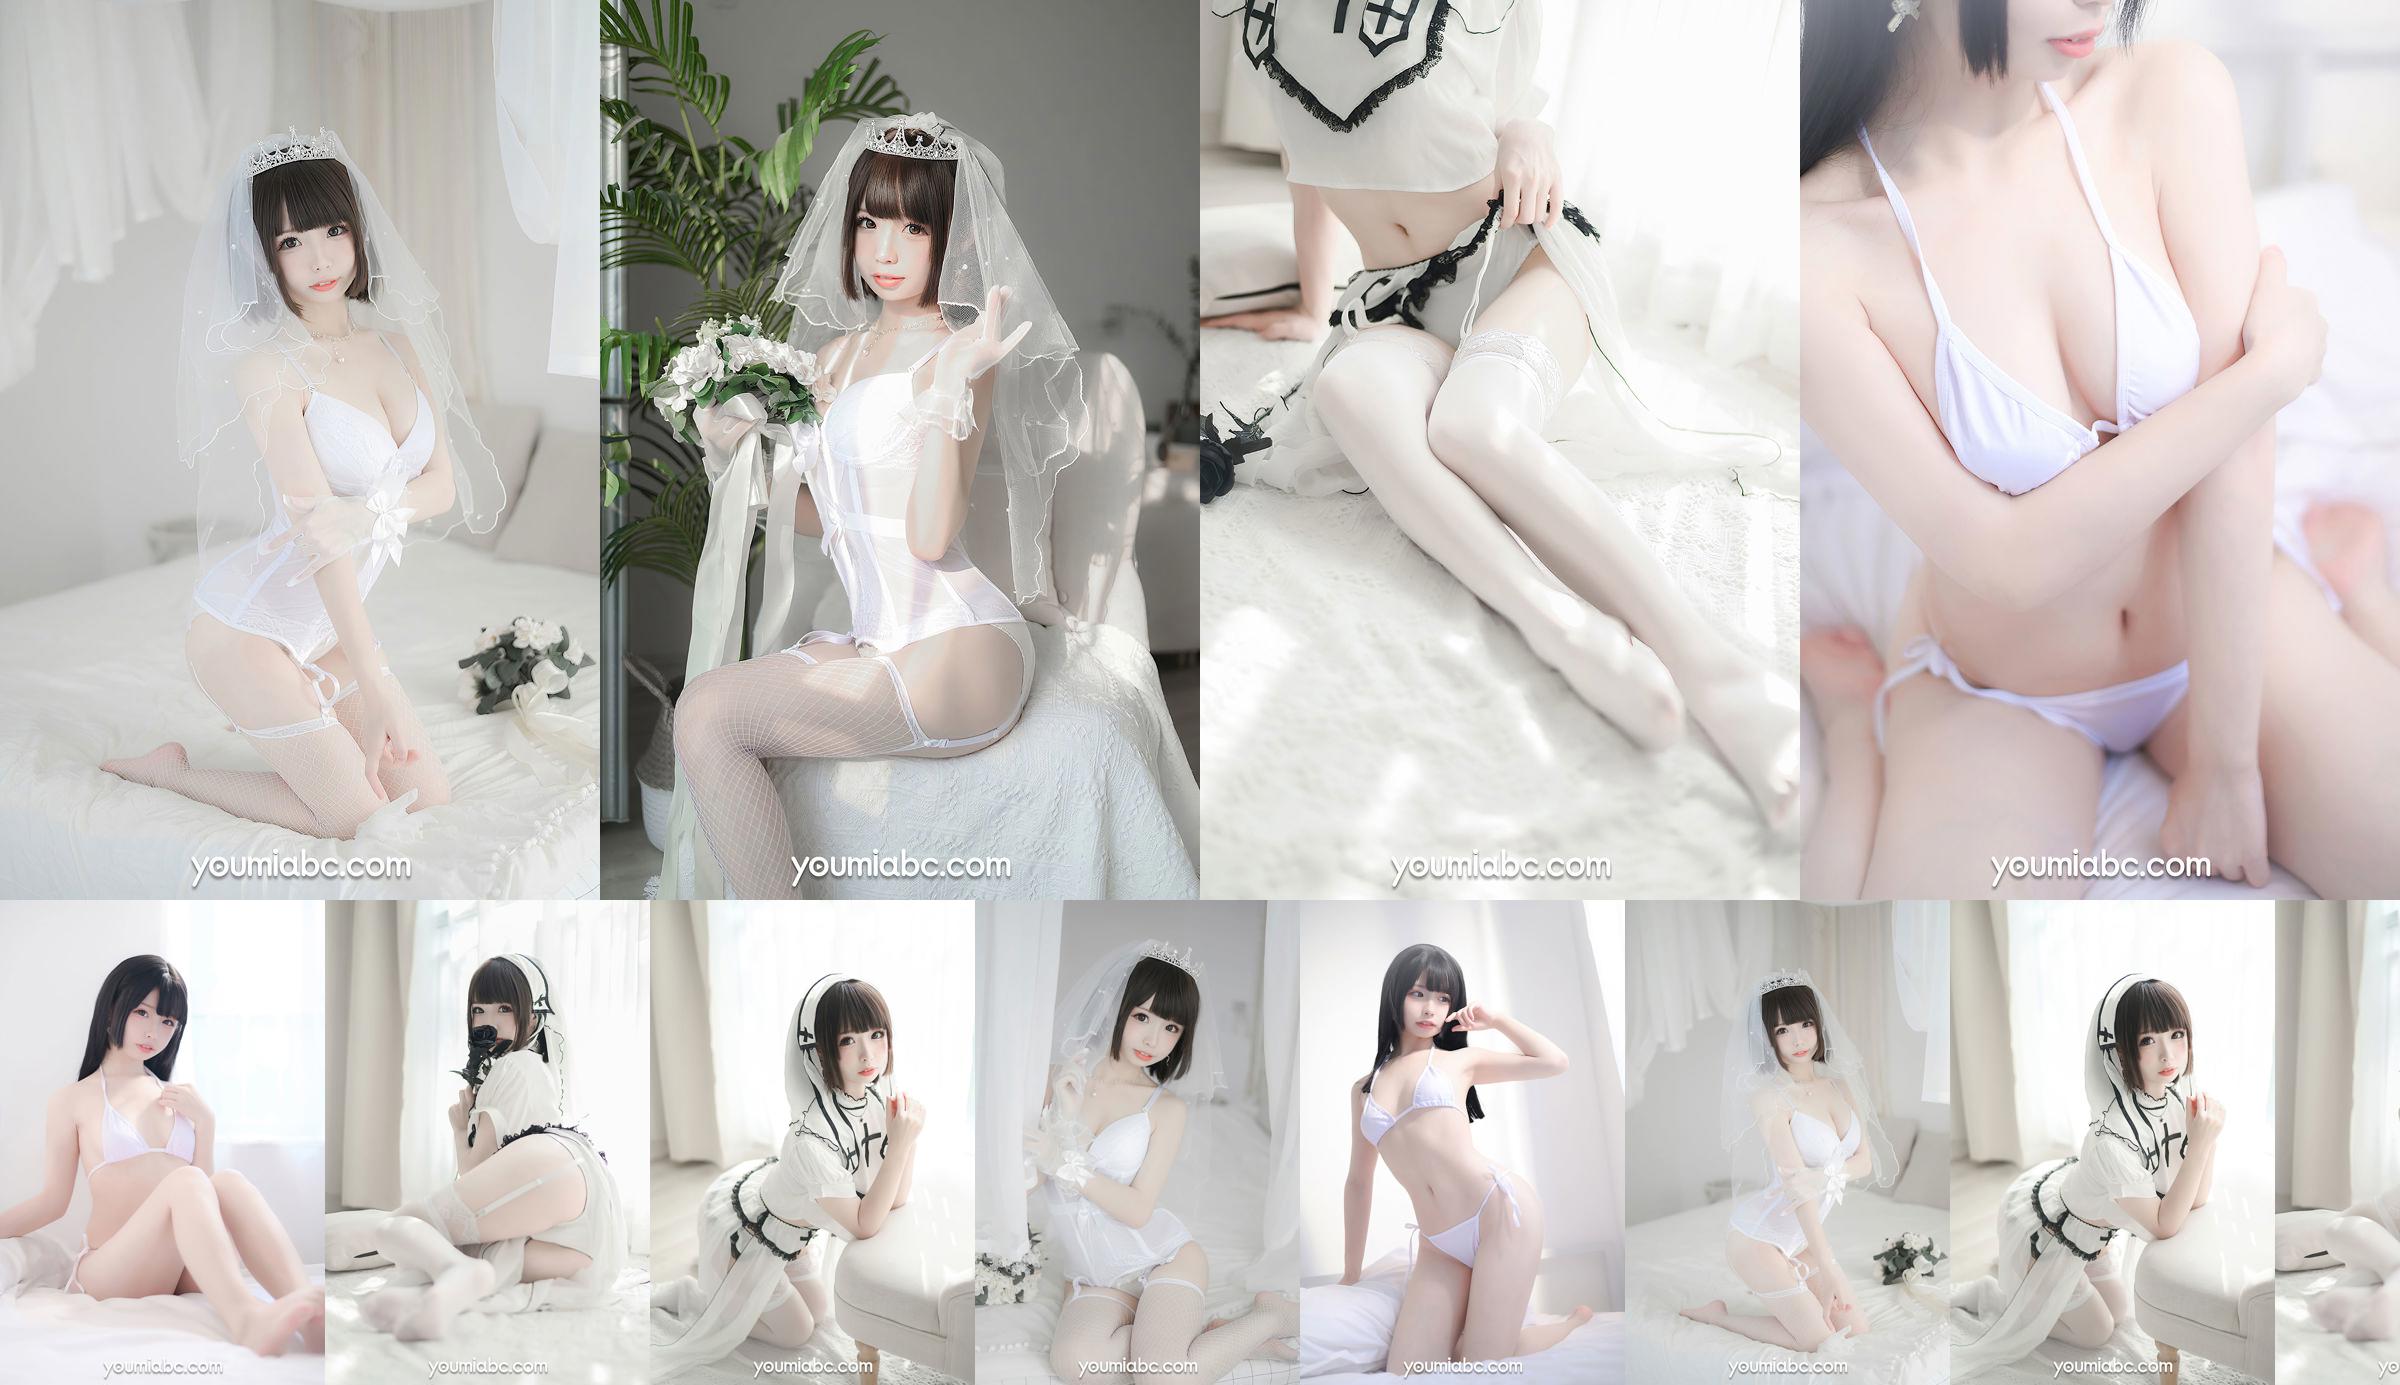 [YouMi YouMi] Sweet Pepper Mio mio - Journal d'amour No.9c2a45 Page 7